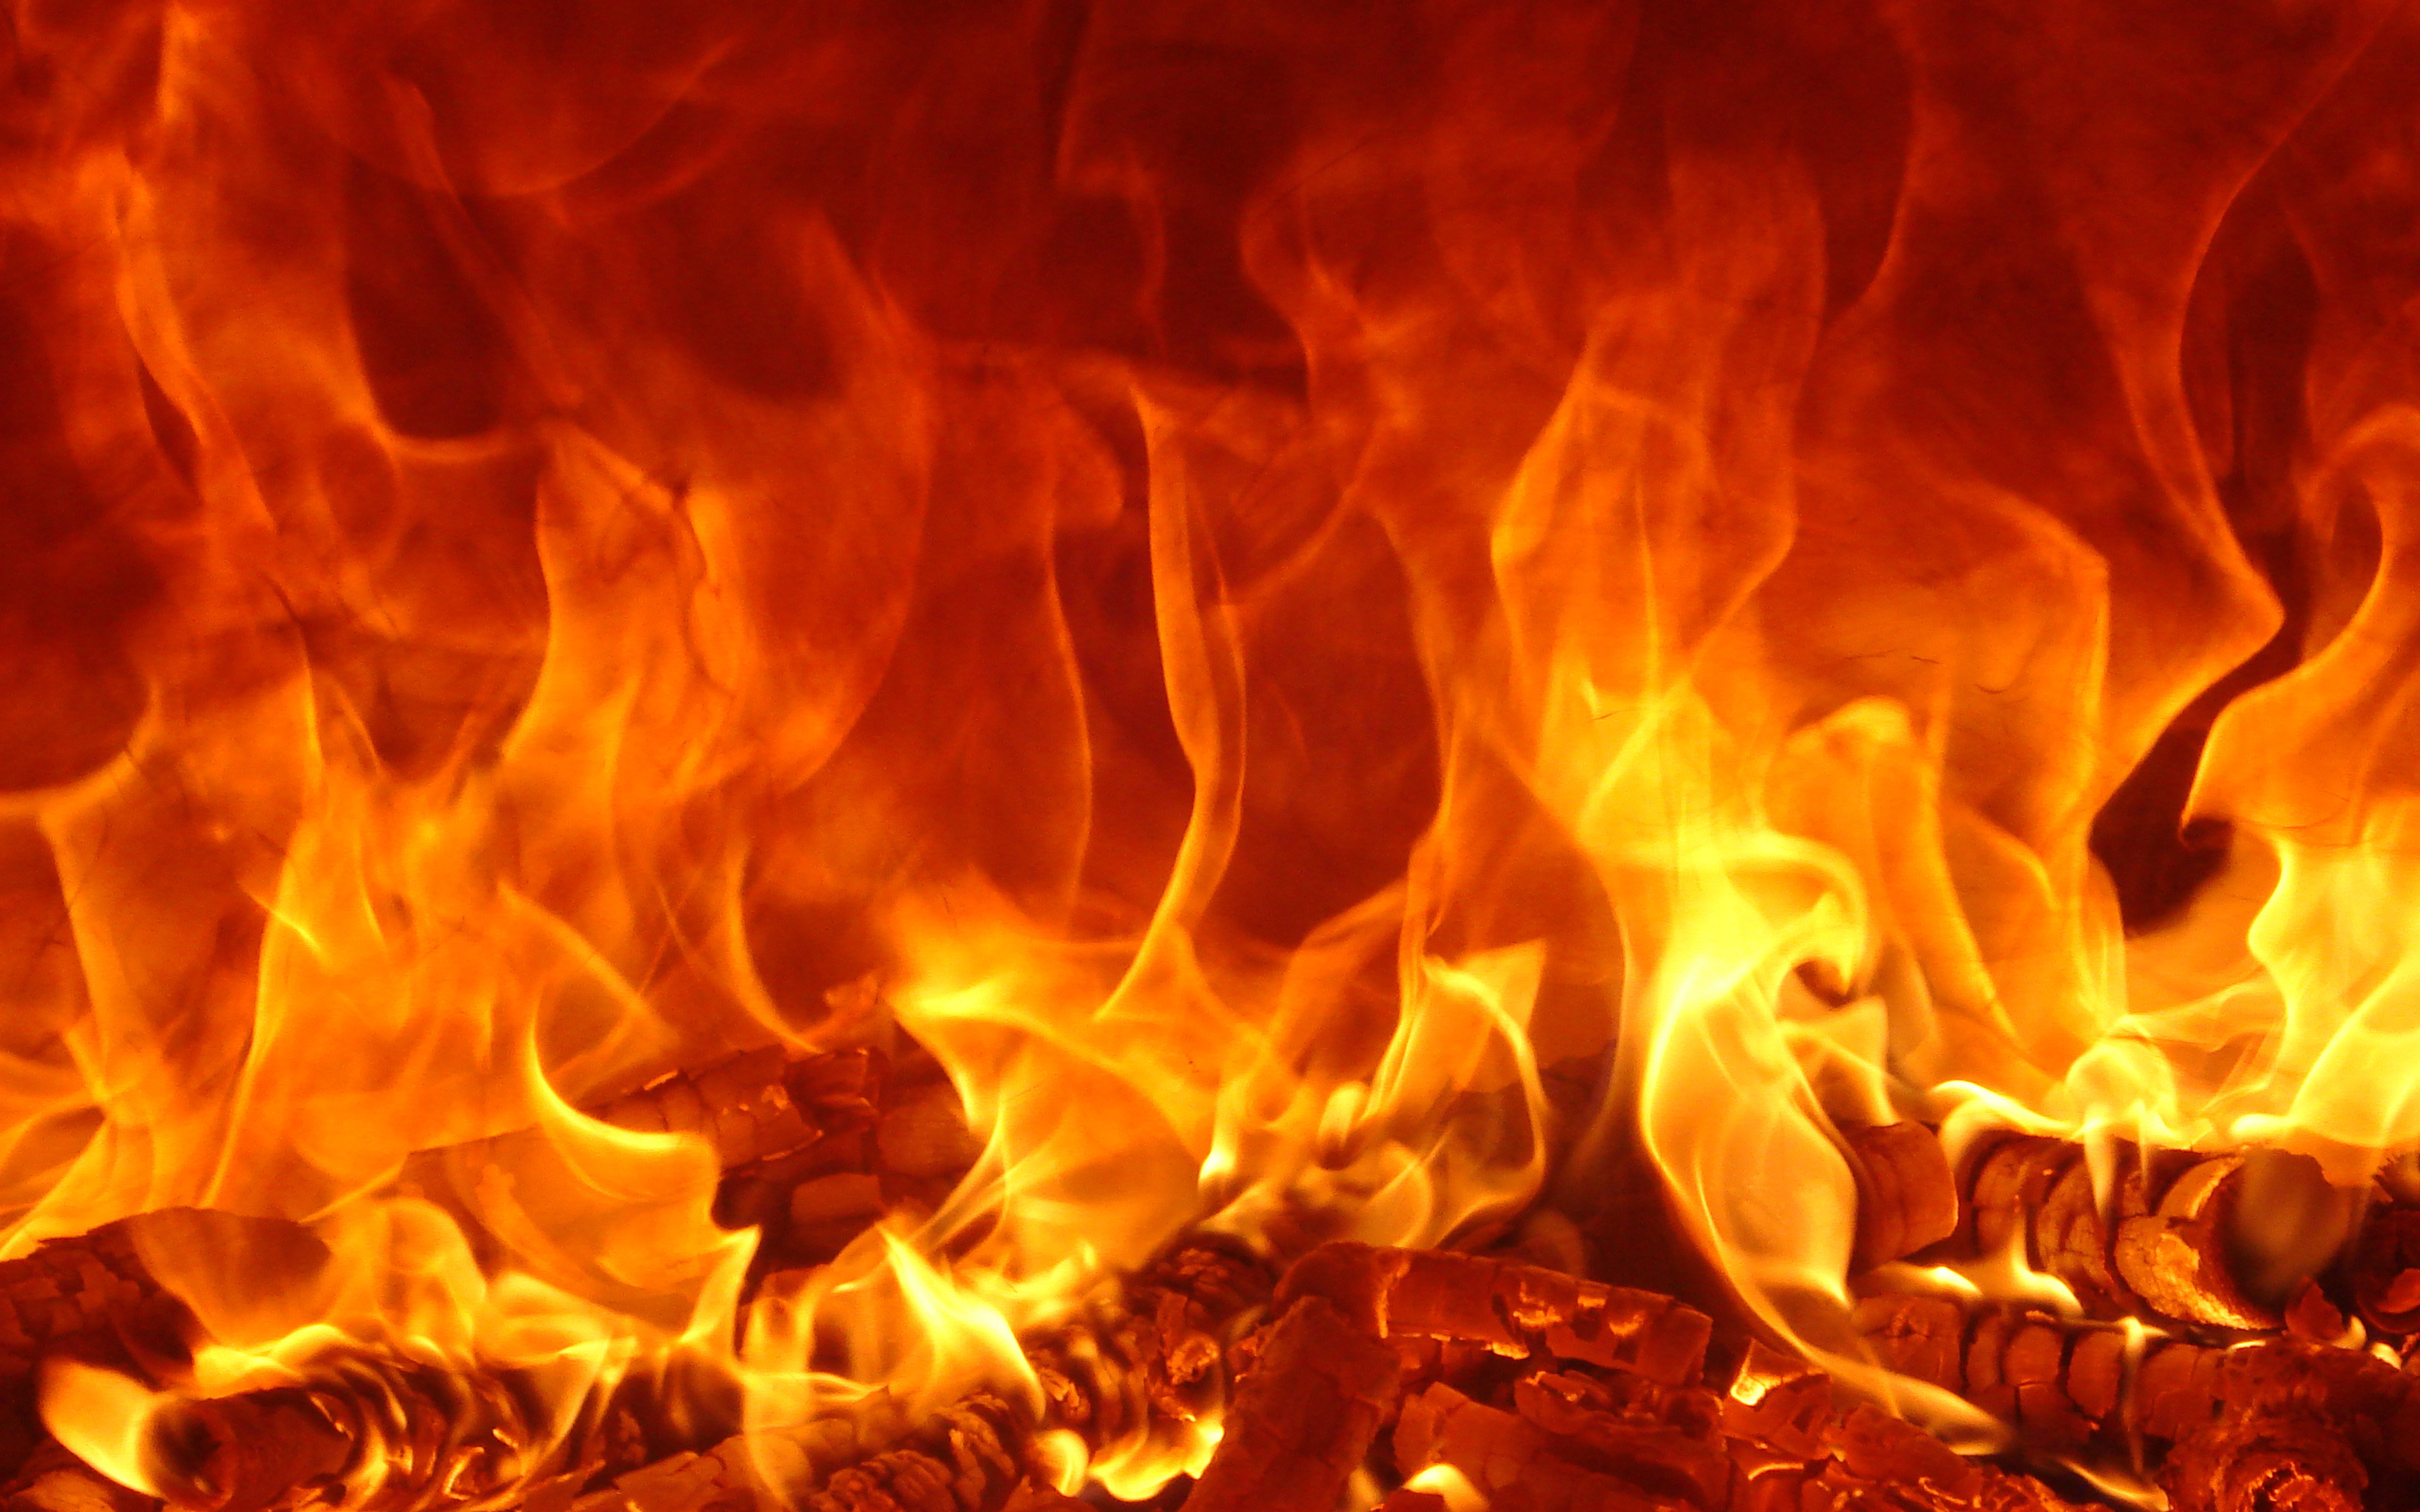 Fire images